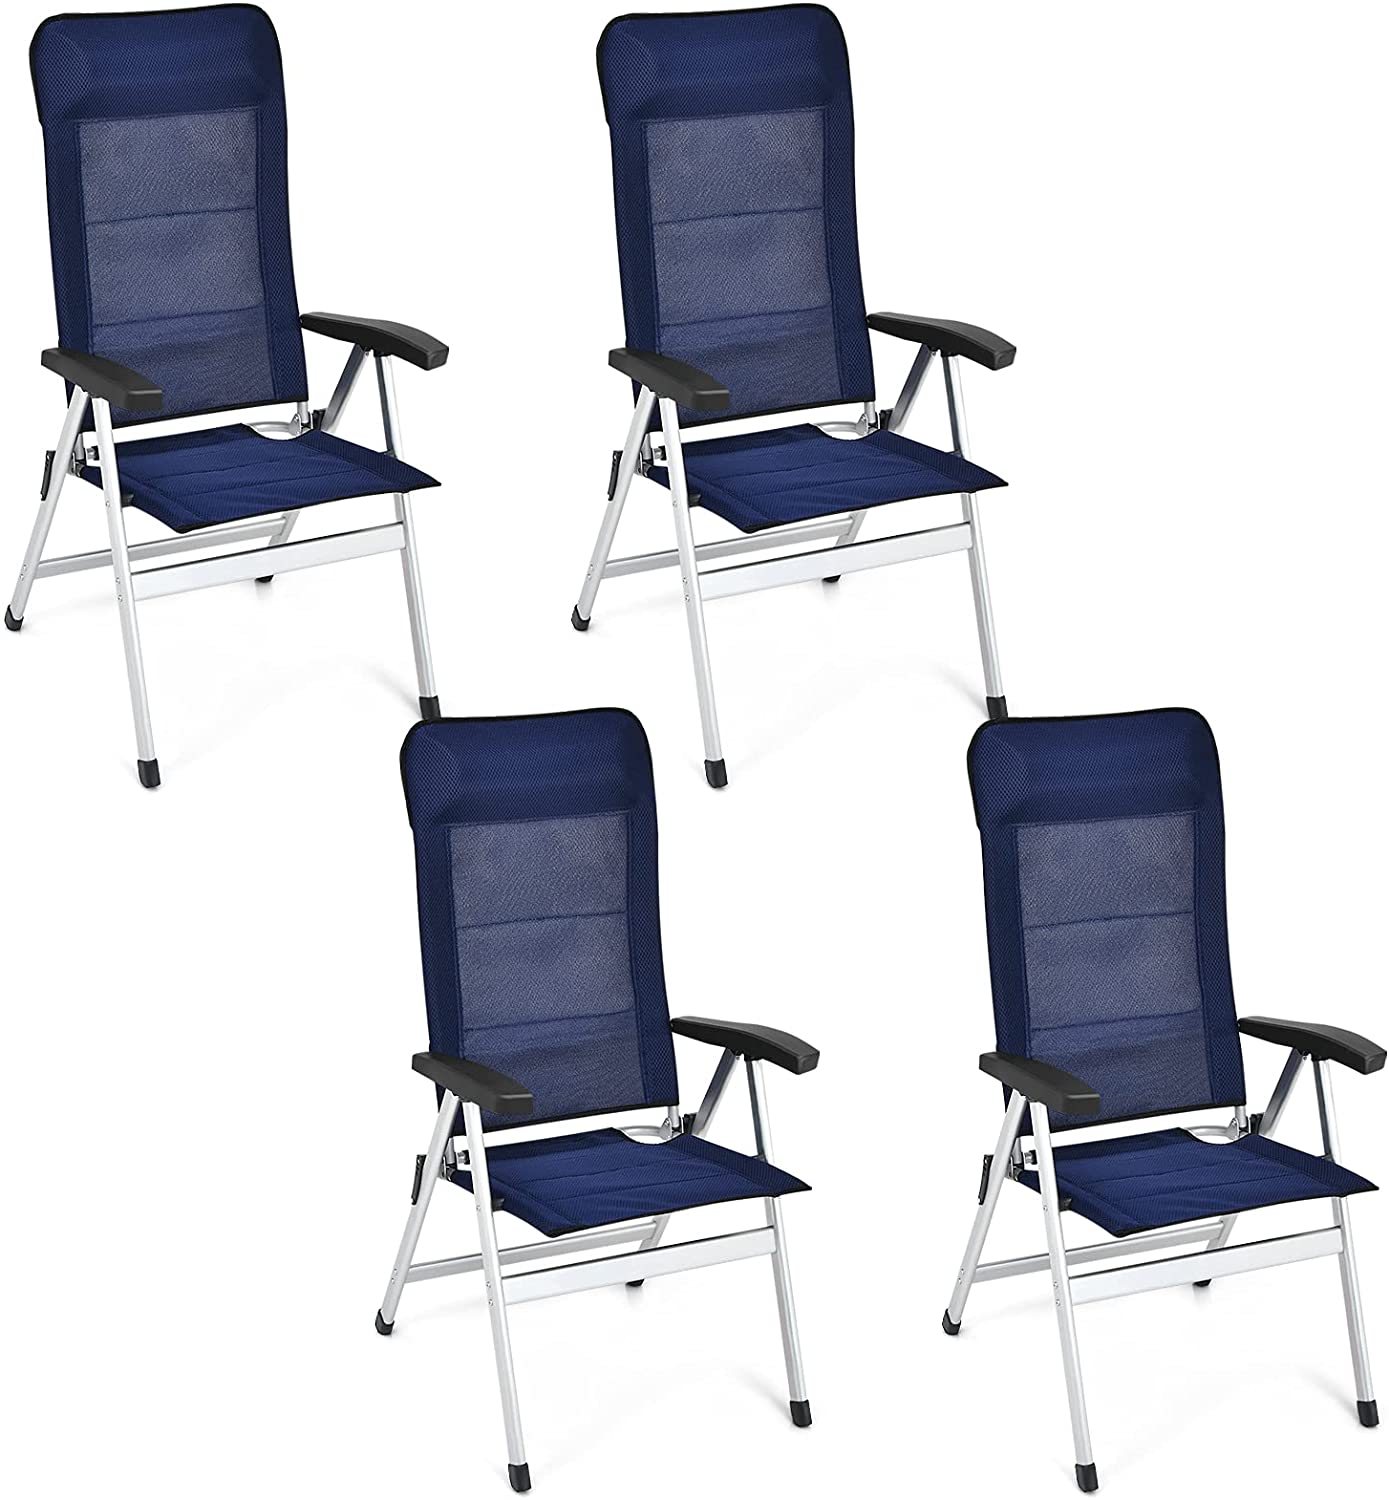 Giantex Set of 4 Patio Chairs, Folding Outdoor Chairs, High Back Recliner (Blue)